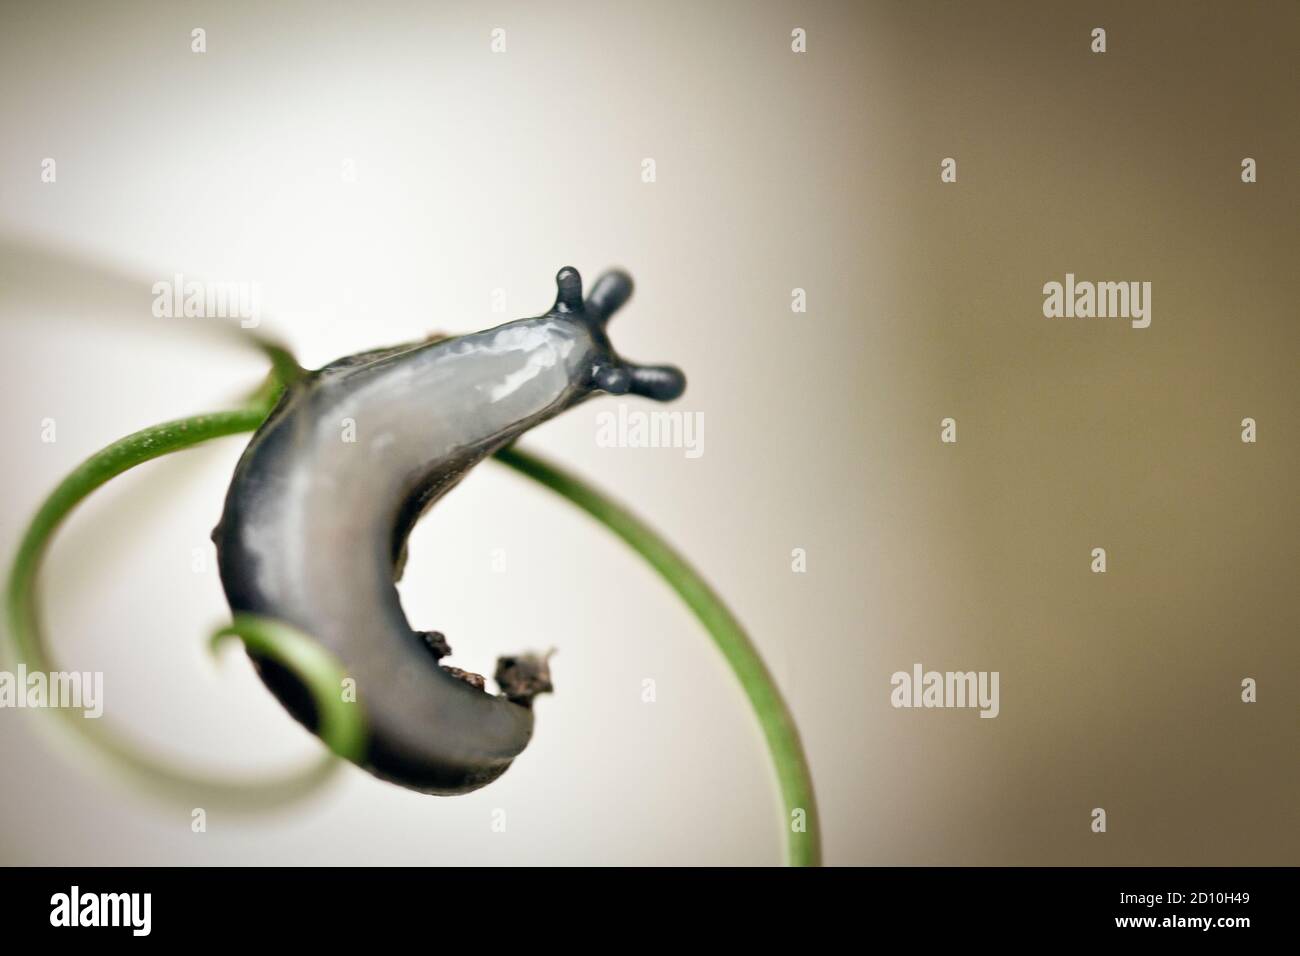 A slug mirroring the shape of the plant on which it is climbing, by coincidence. Stock Photo